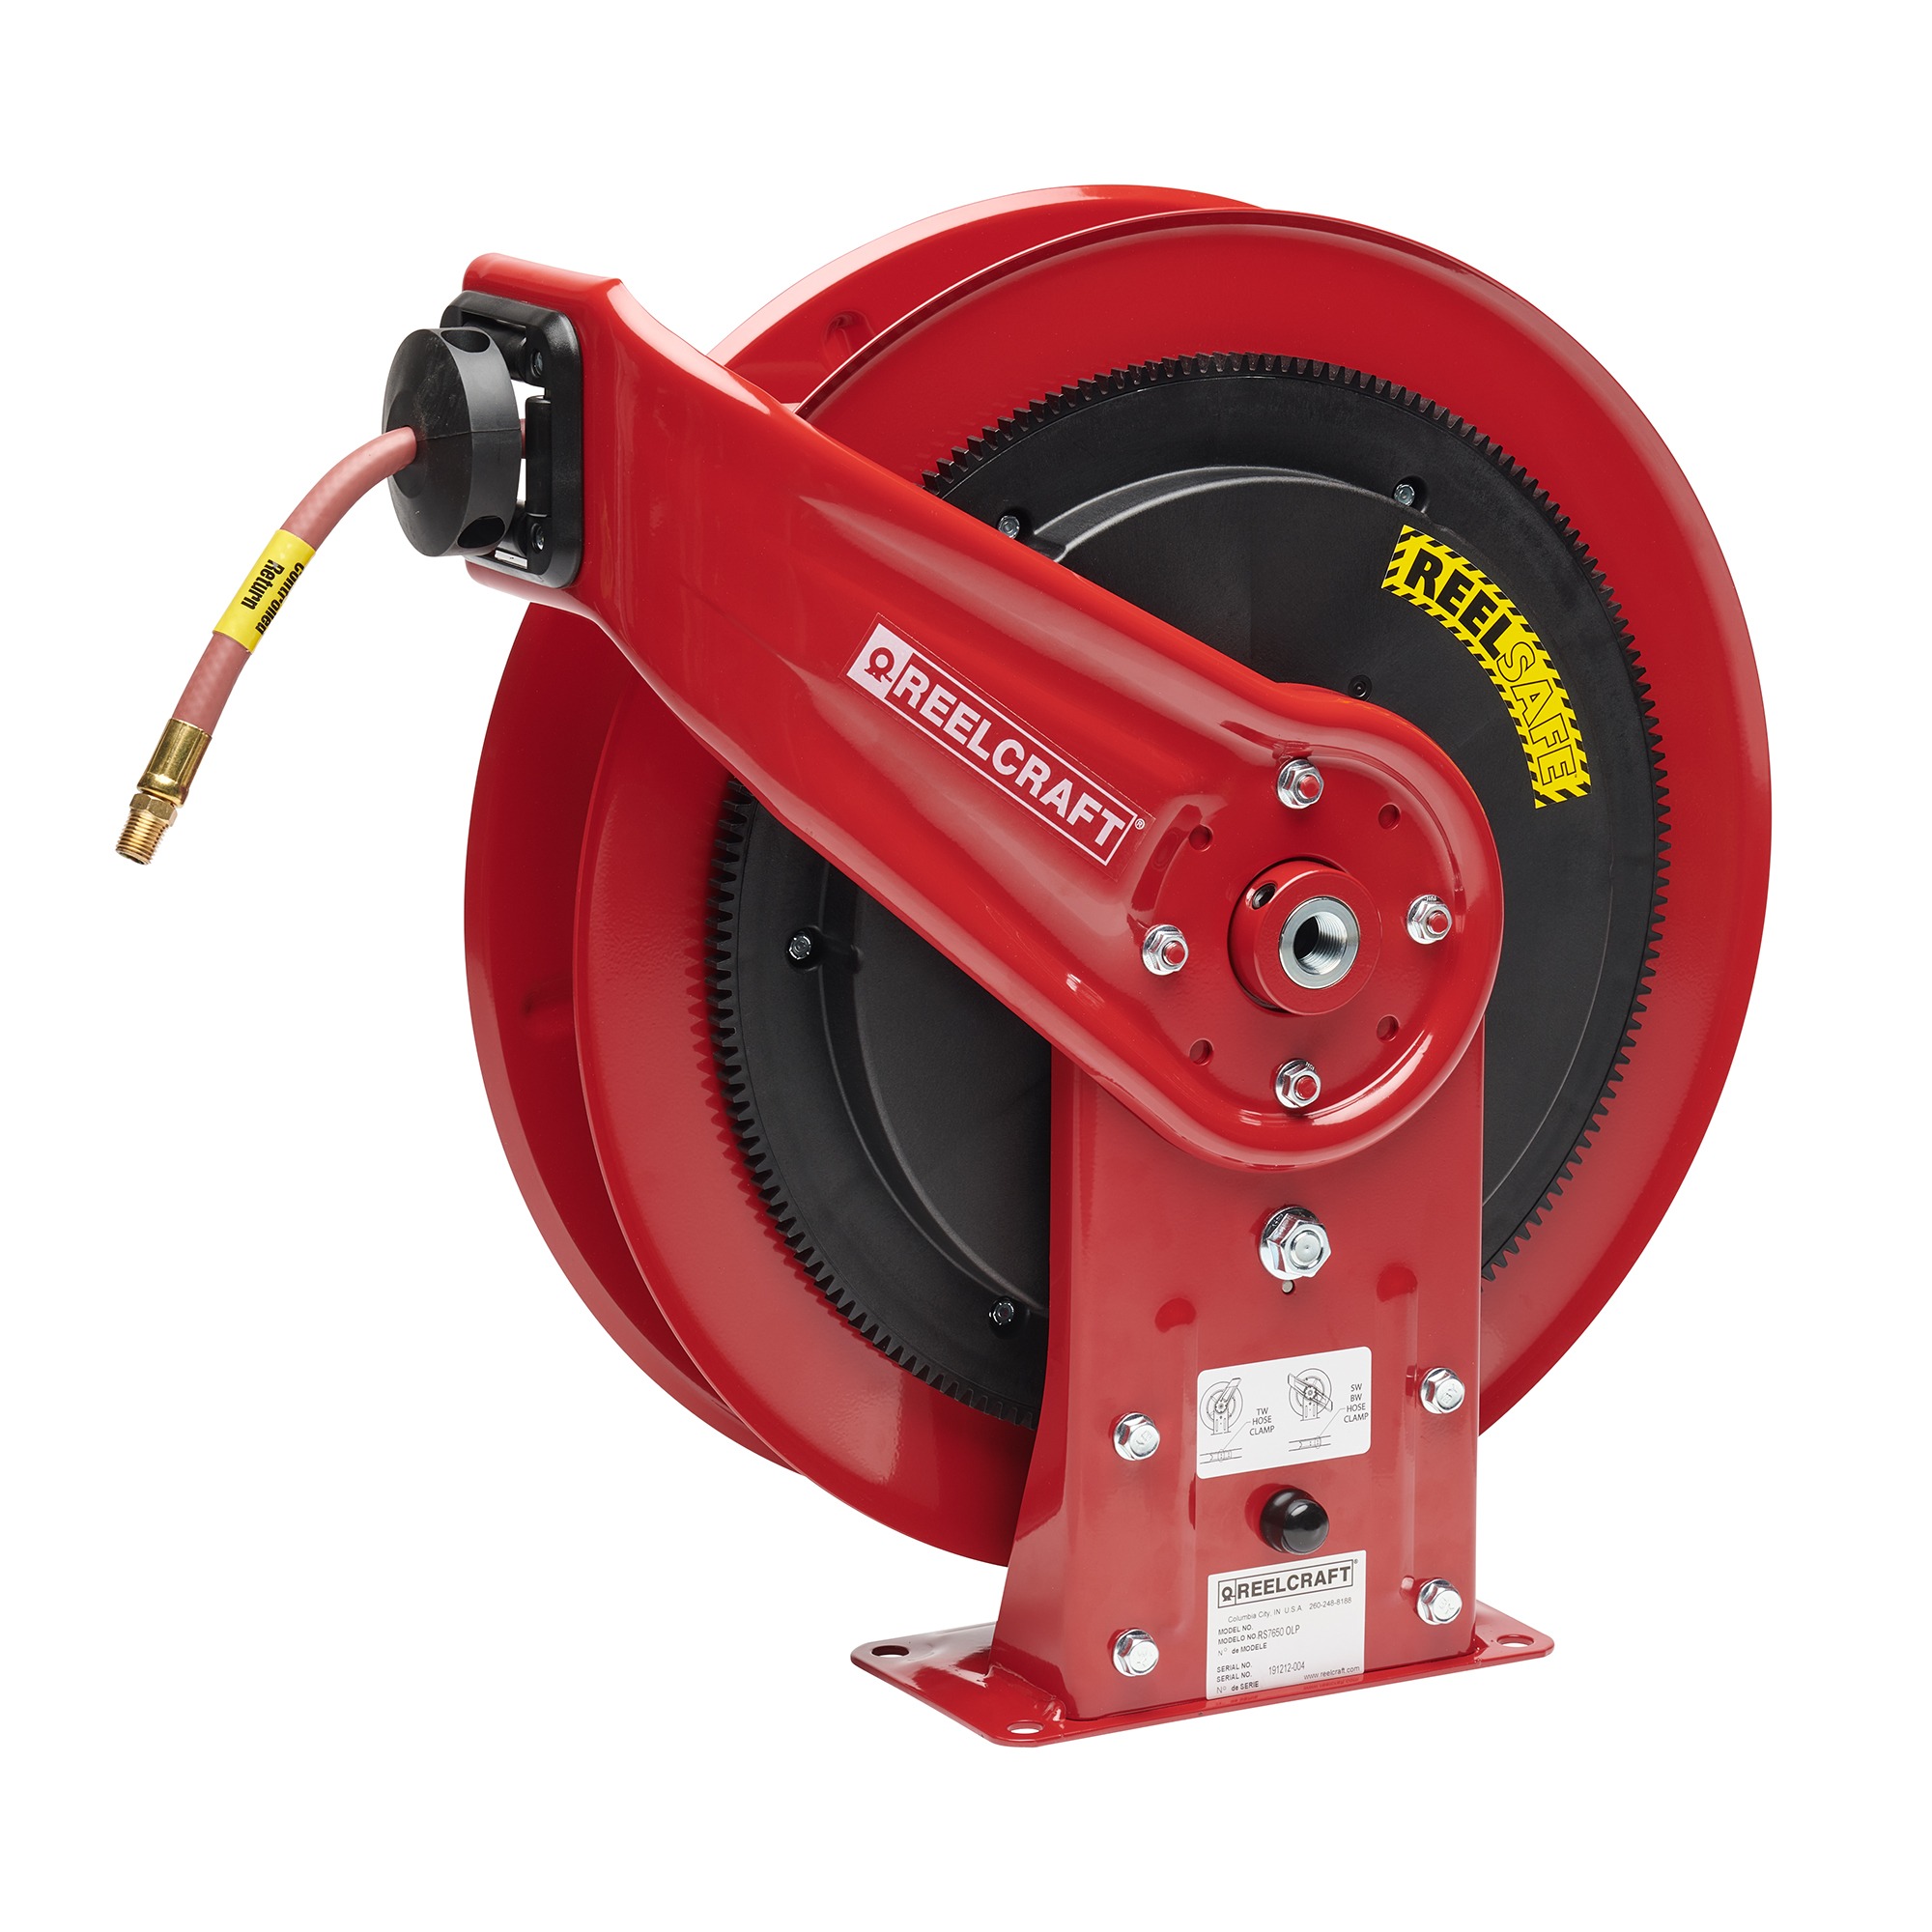 REELSAFE Controlled Return Air and Water Hose Reel Image